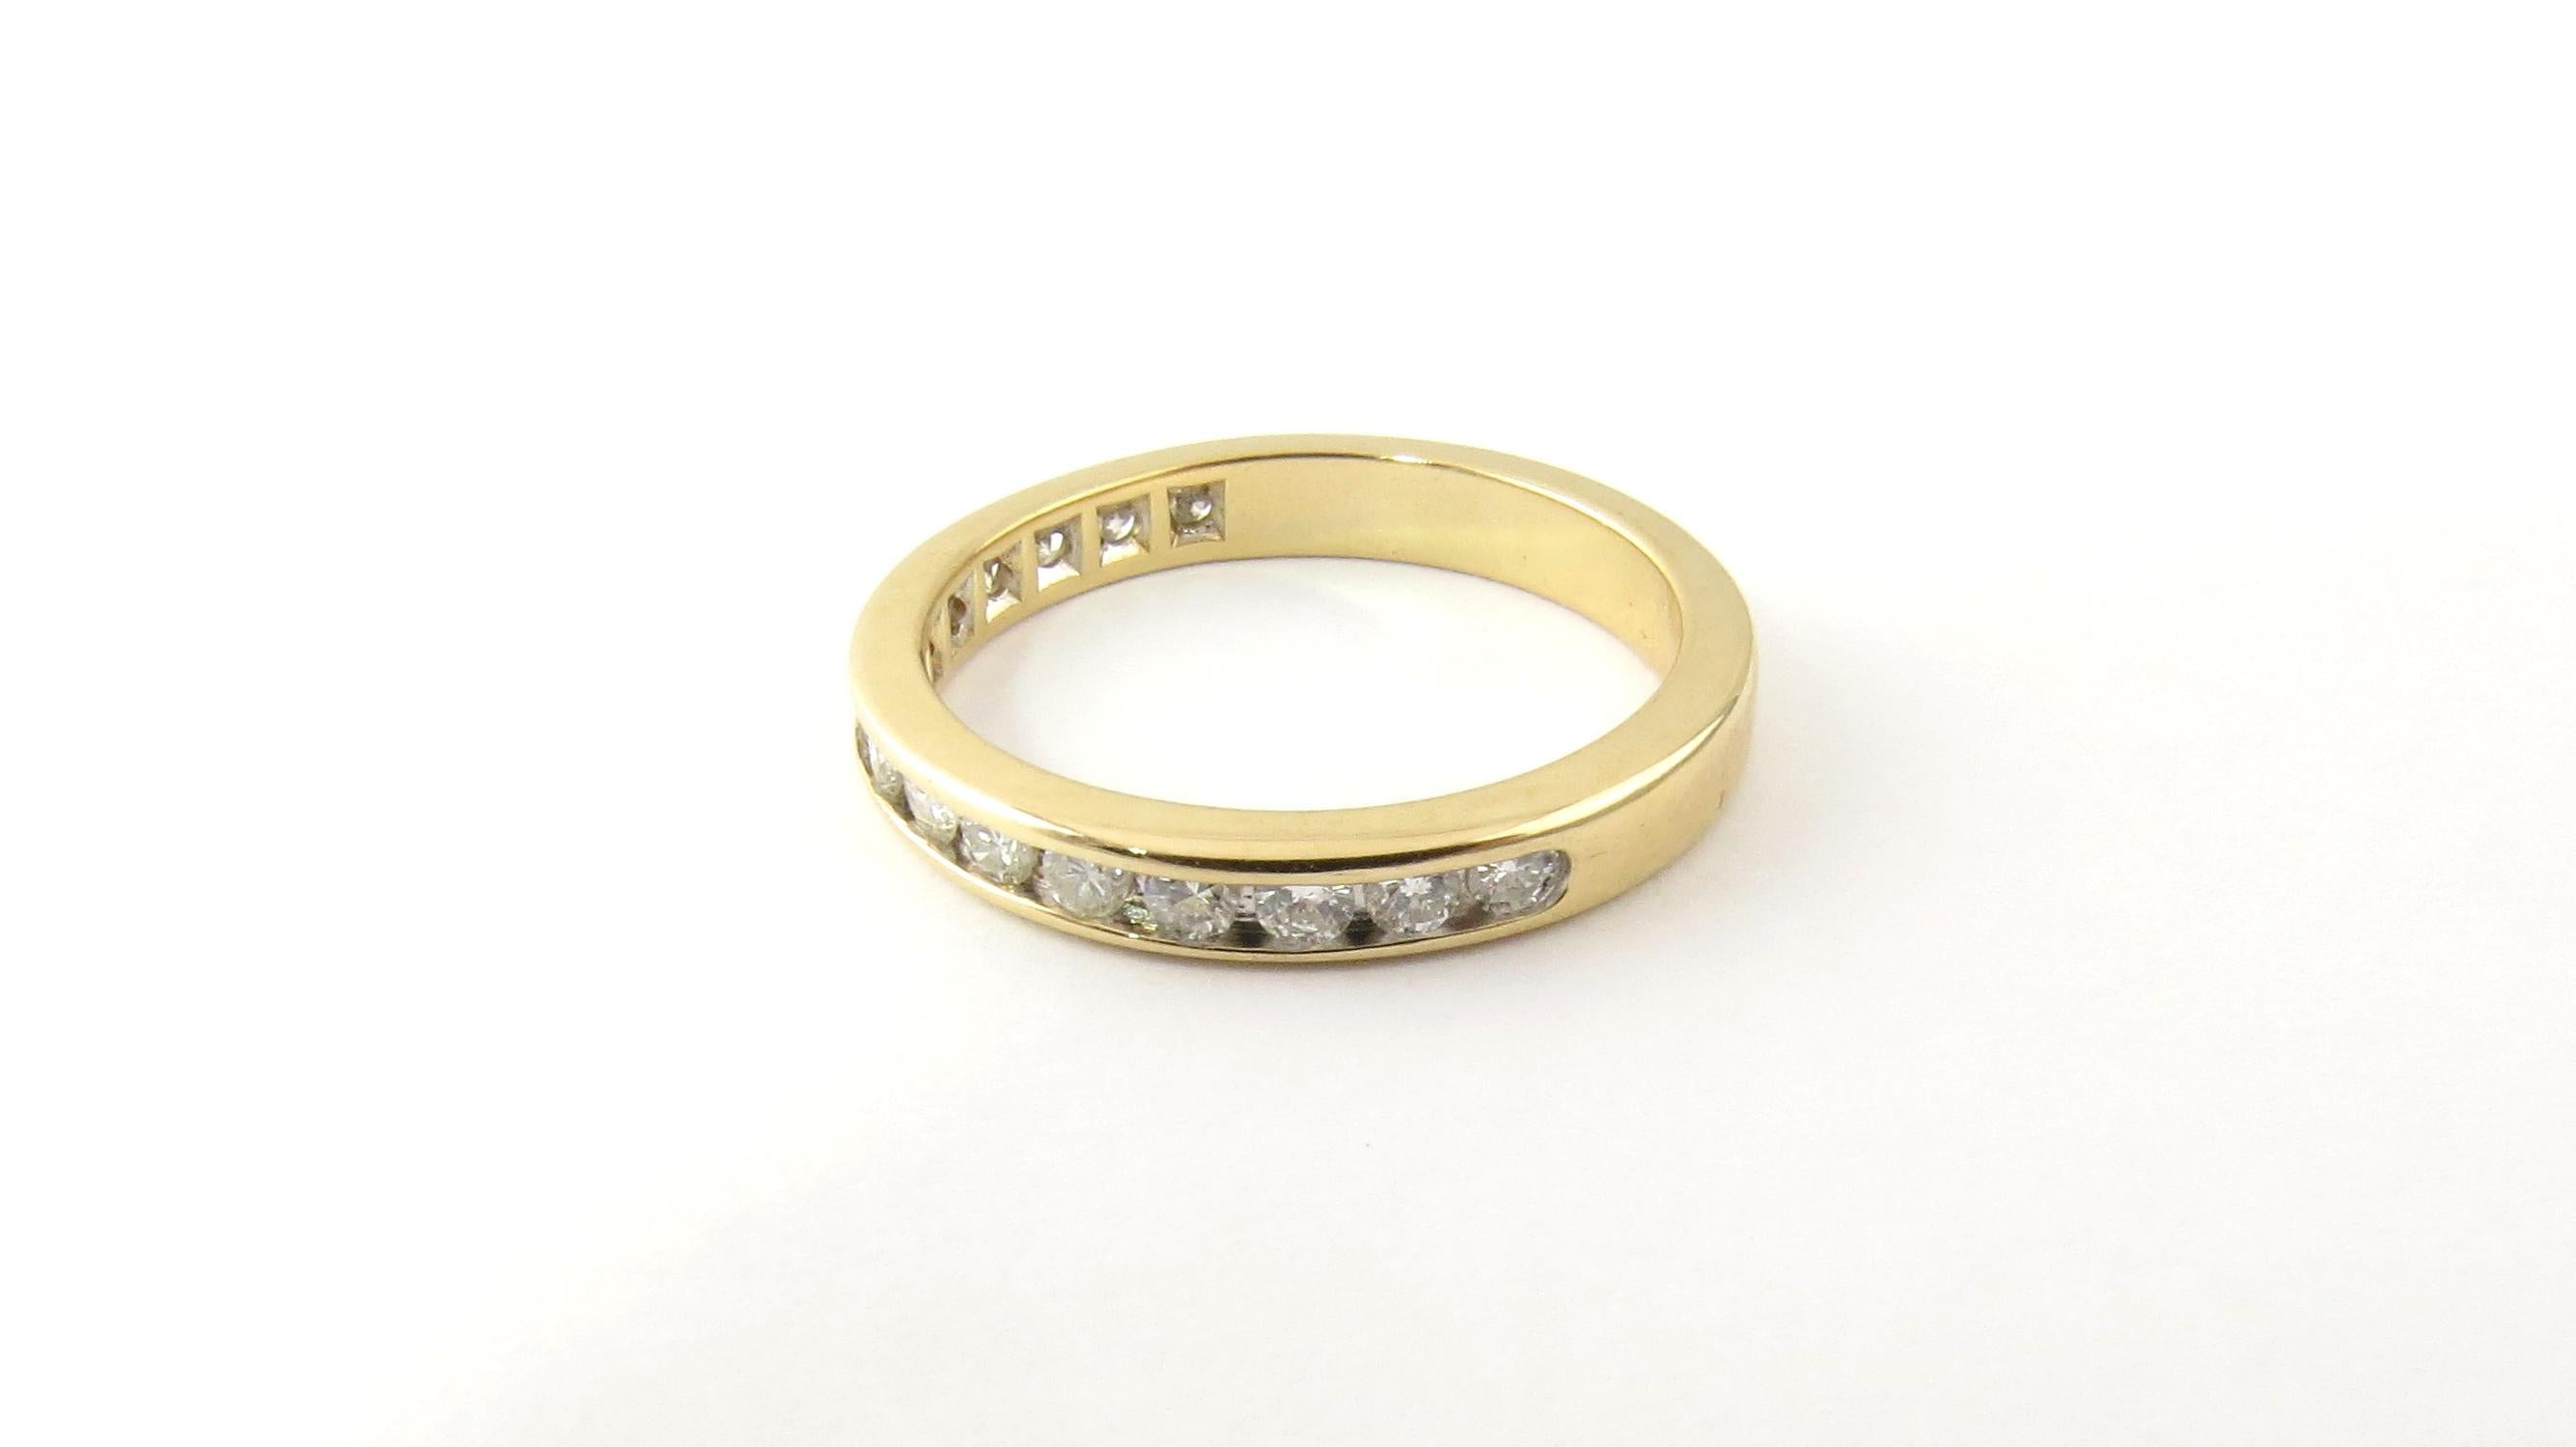 Vintage 14 Karat White Gold Diamond Wedding Band Size 7

This sparkling wedding band features 15 round brilliant cut diamonds set in classic 14K white gold. Width: 3 mm.

Approximate total diamond weight: .75 ct.

Diamond color: H-I

Diamond